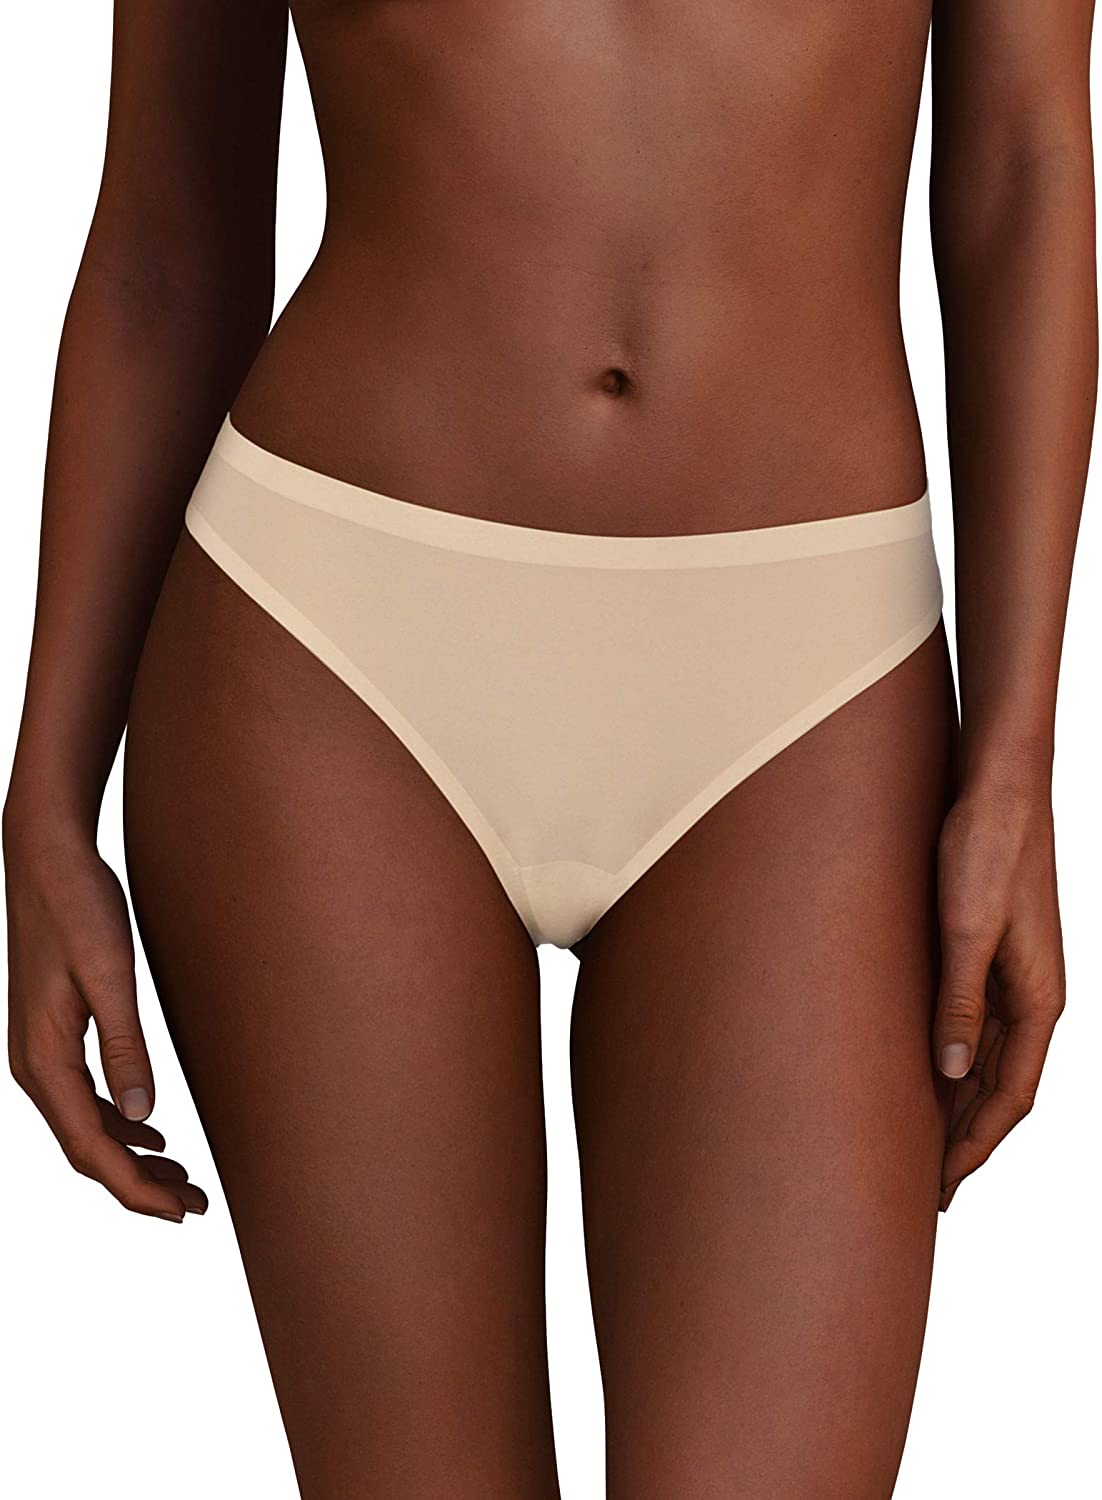 This thong from the SoftStretch line by Chantelle is a must-have for any wardrobe. Featuring laser-cut edging to prevent panty lines, this seamless underwear offers a second-skin sensation, ultra-softness, and unrestricted movement. Its lightweight, ultra-stretchable fabrics provide a comfortable fit for any body shape.